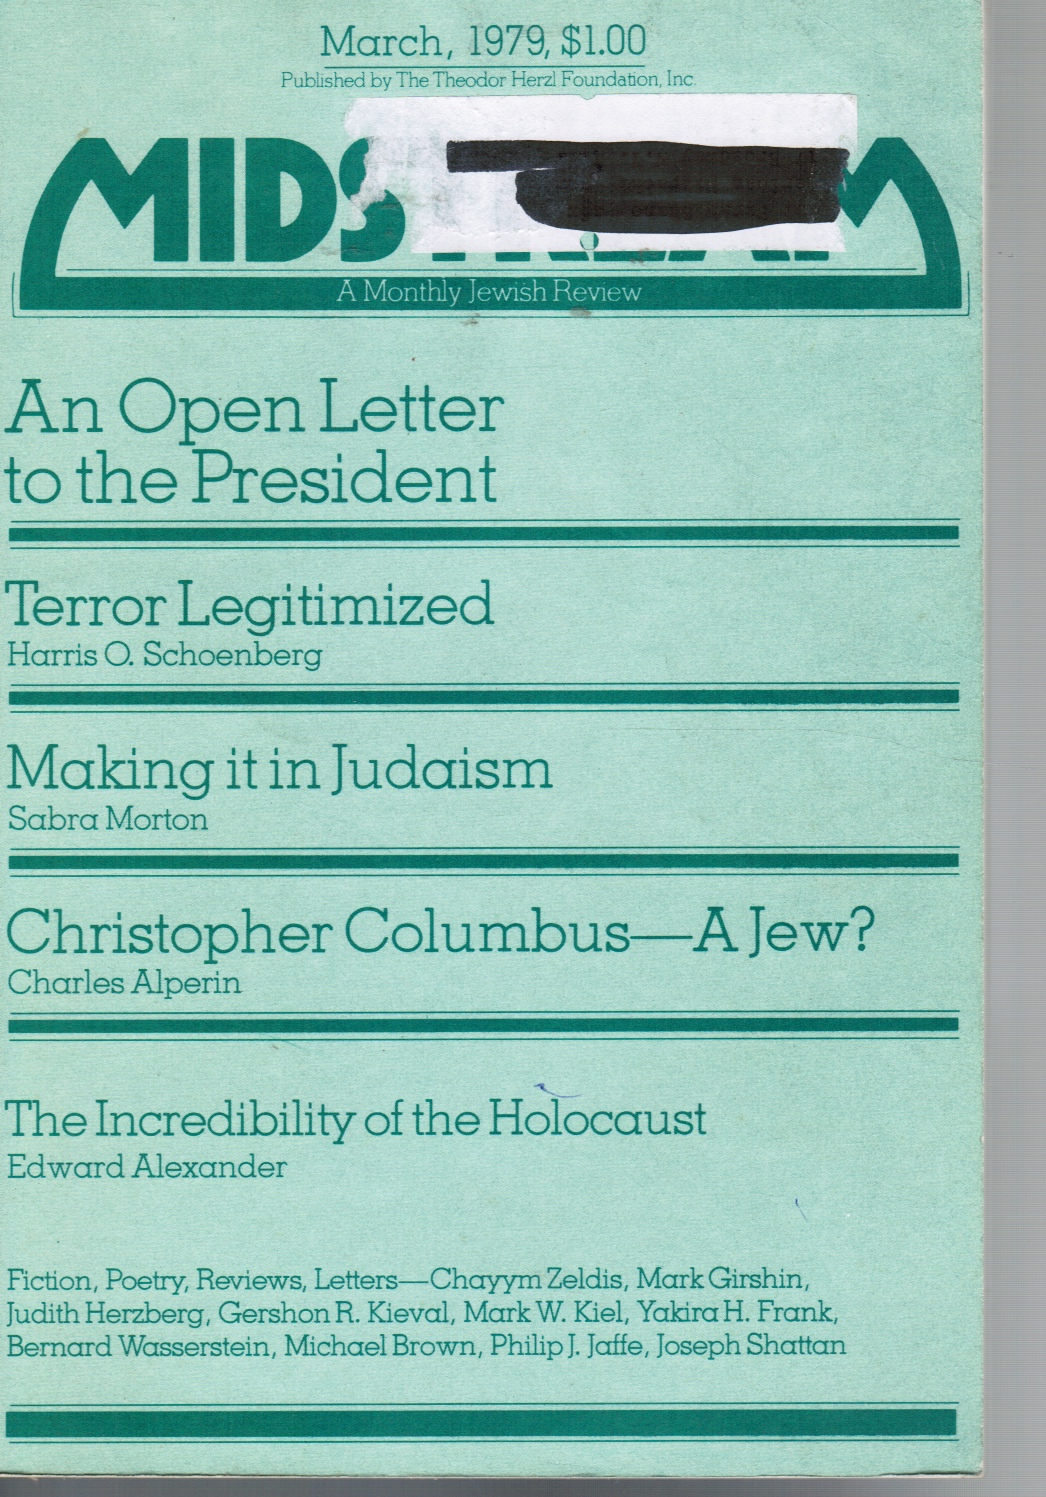 JOEL CARMICHAEL, EDITOR - Midstream: A Monthly Jewish Review -- March 1979